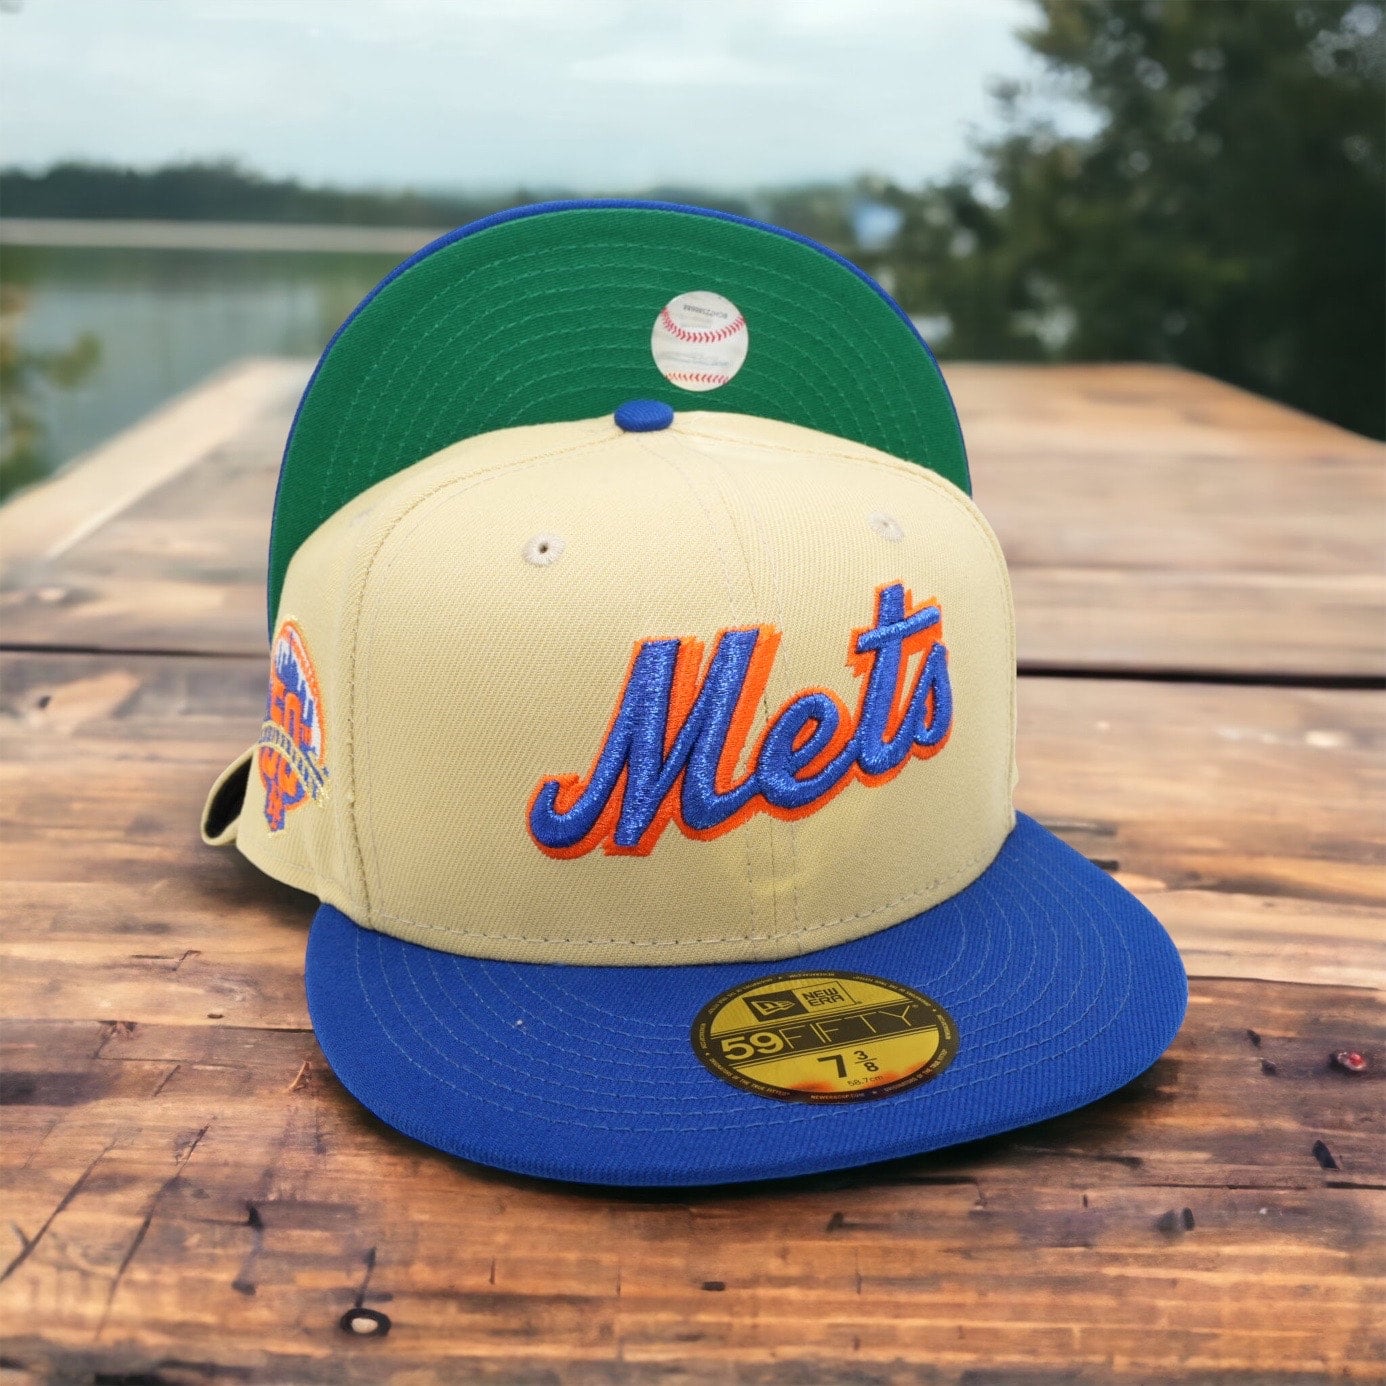 New York Mets snap back hat (005)